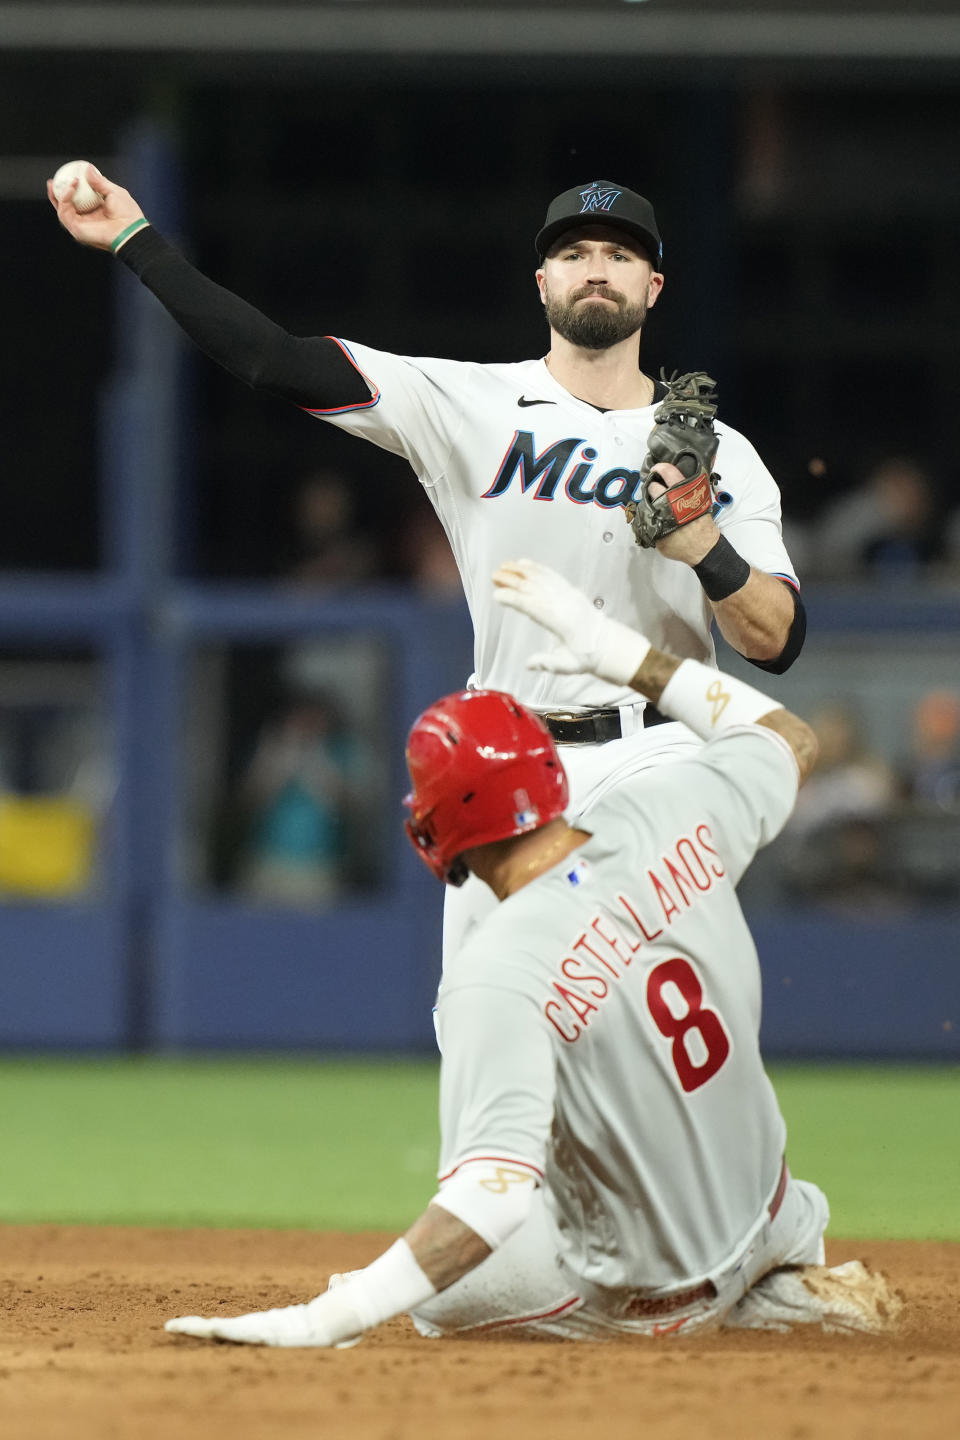 Miami Marlins shortstop Jon Berti tags Philadelphia Phillies' Nick Castellanos (8) at second base but is unable to complete the double play during the ninth inning of a baseball game against the Philadelphia Phillies, Wednesday, Aug. 2, 2023, in Miami. The Marlins defeated the Phillies 9-8 in twelve innings. (AP Photo/Marta Lavandier)